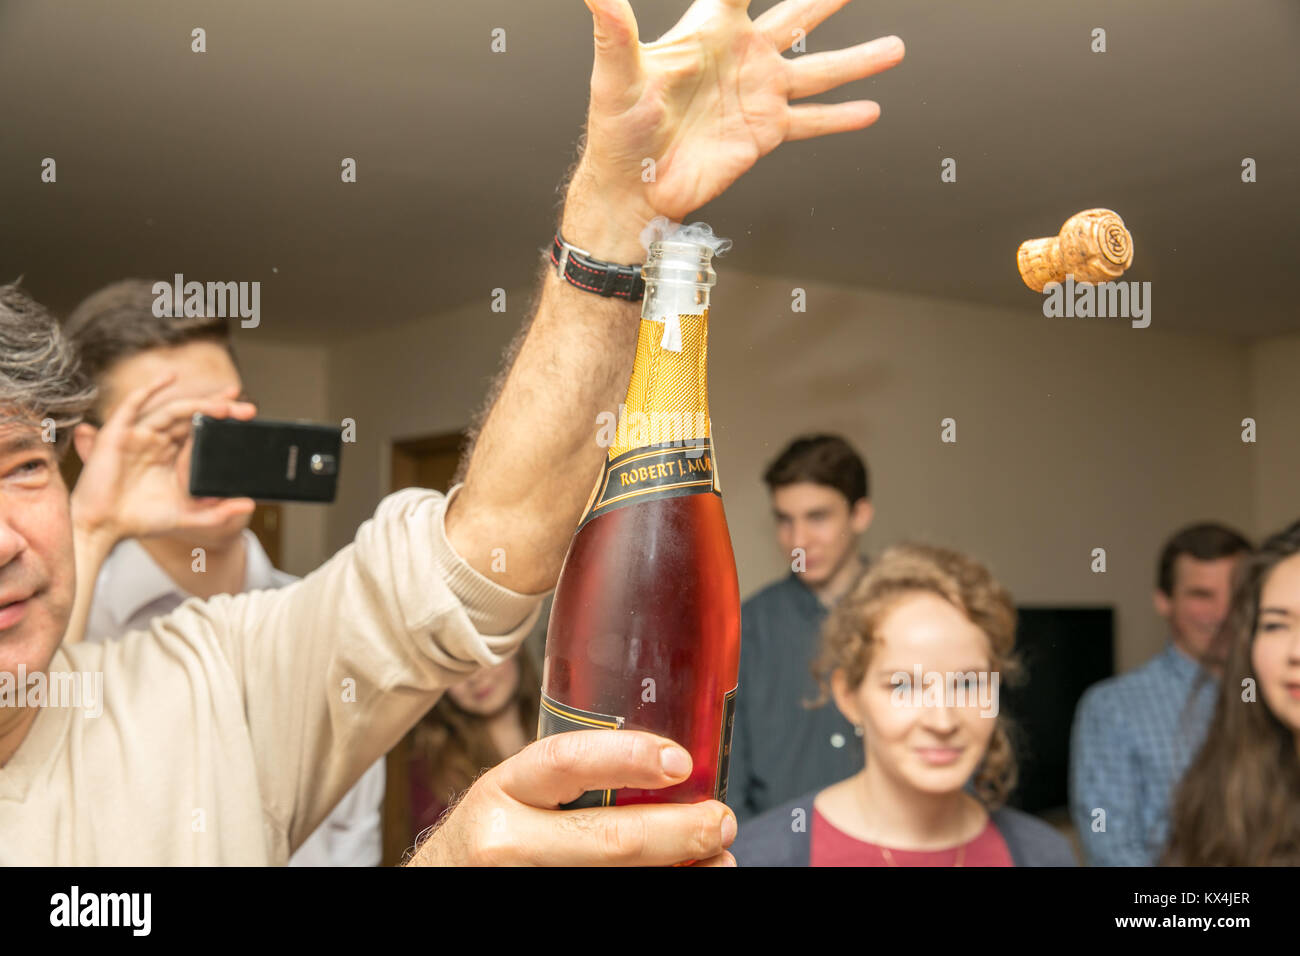 Family party and champagne celebration Stock Photo